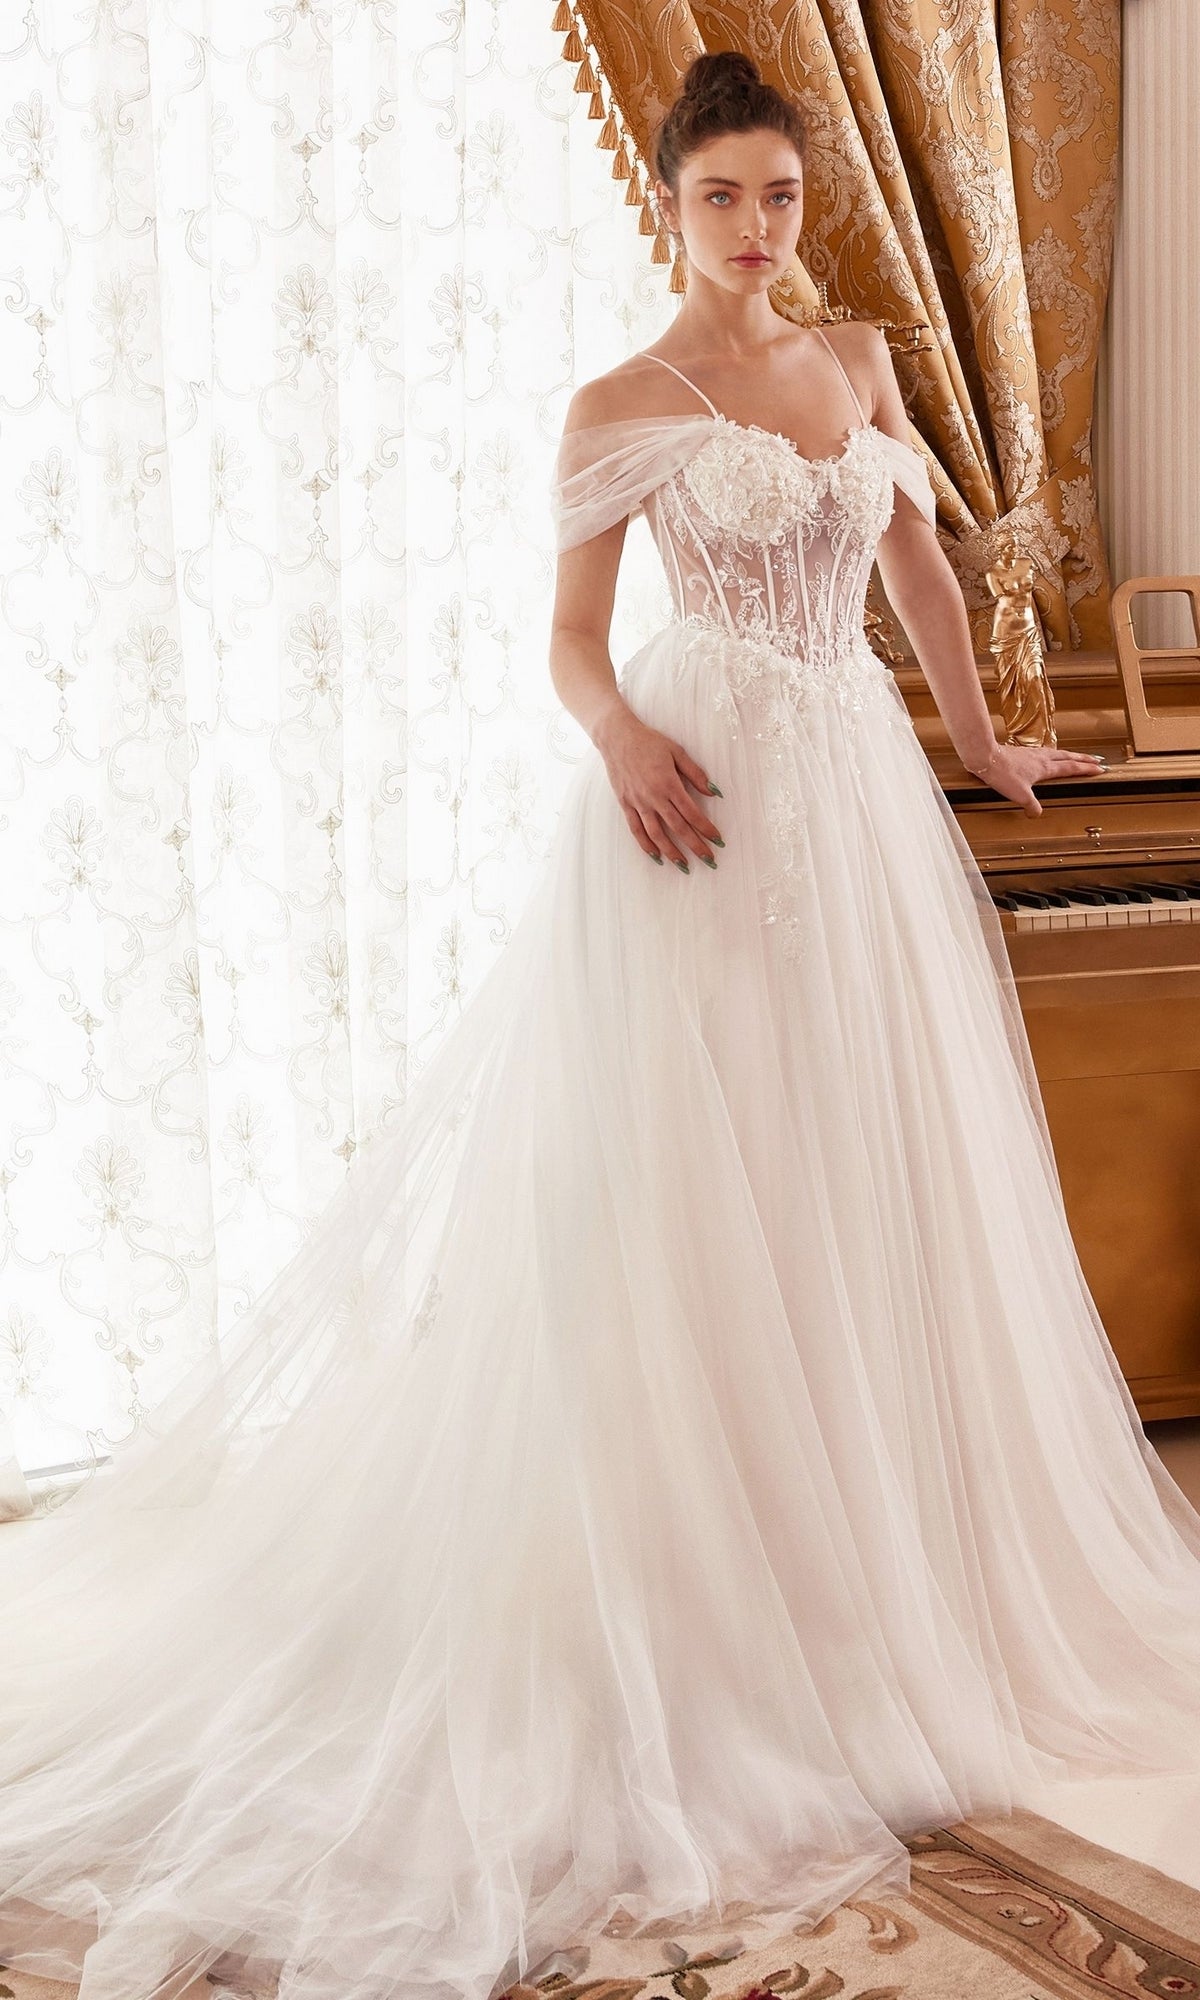 Sheer-Bodice Off-White Ball Gown WN307